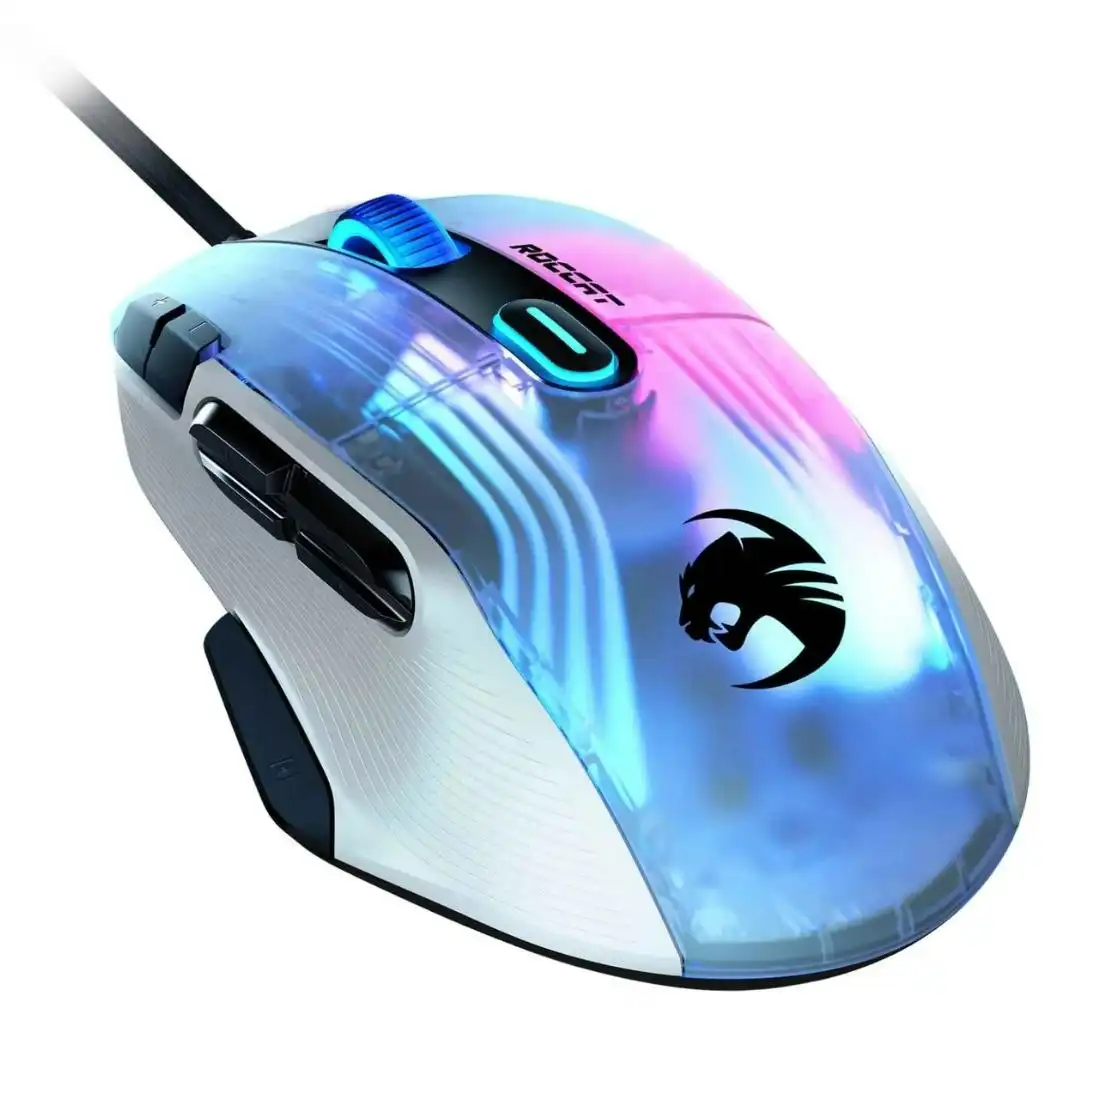 Roccat Kone XP Ergonomic Performance 3D Lighting RGB Wired Gaming Mouse - White